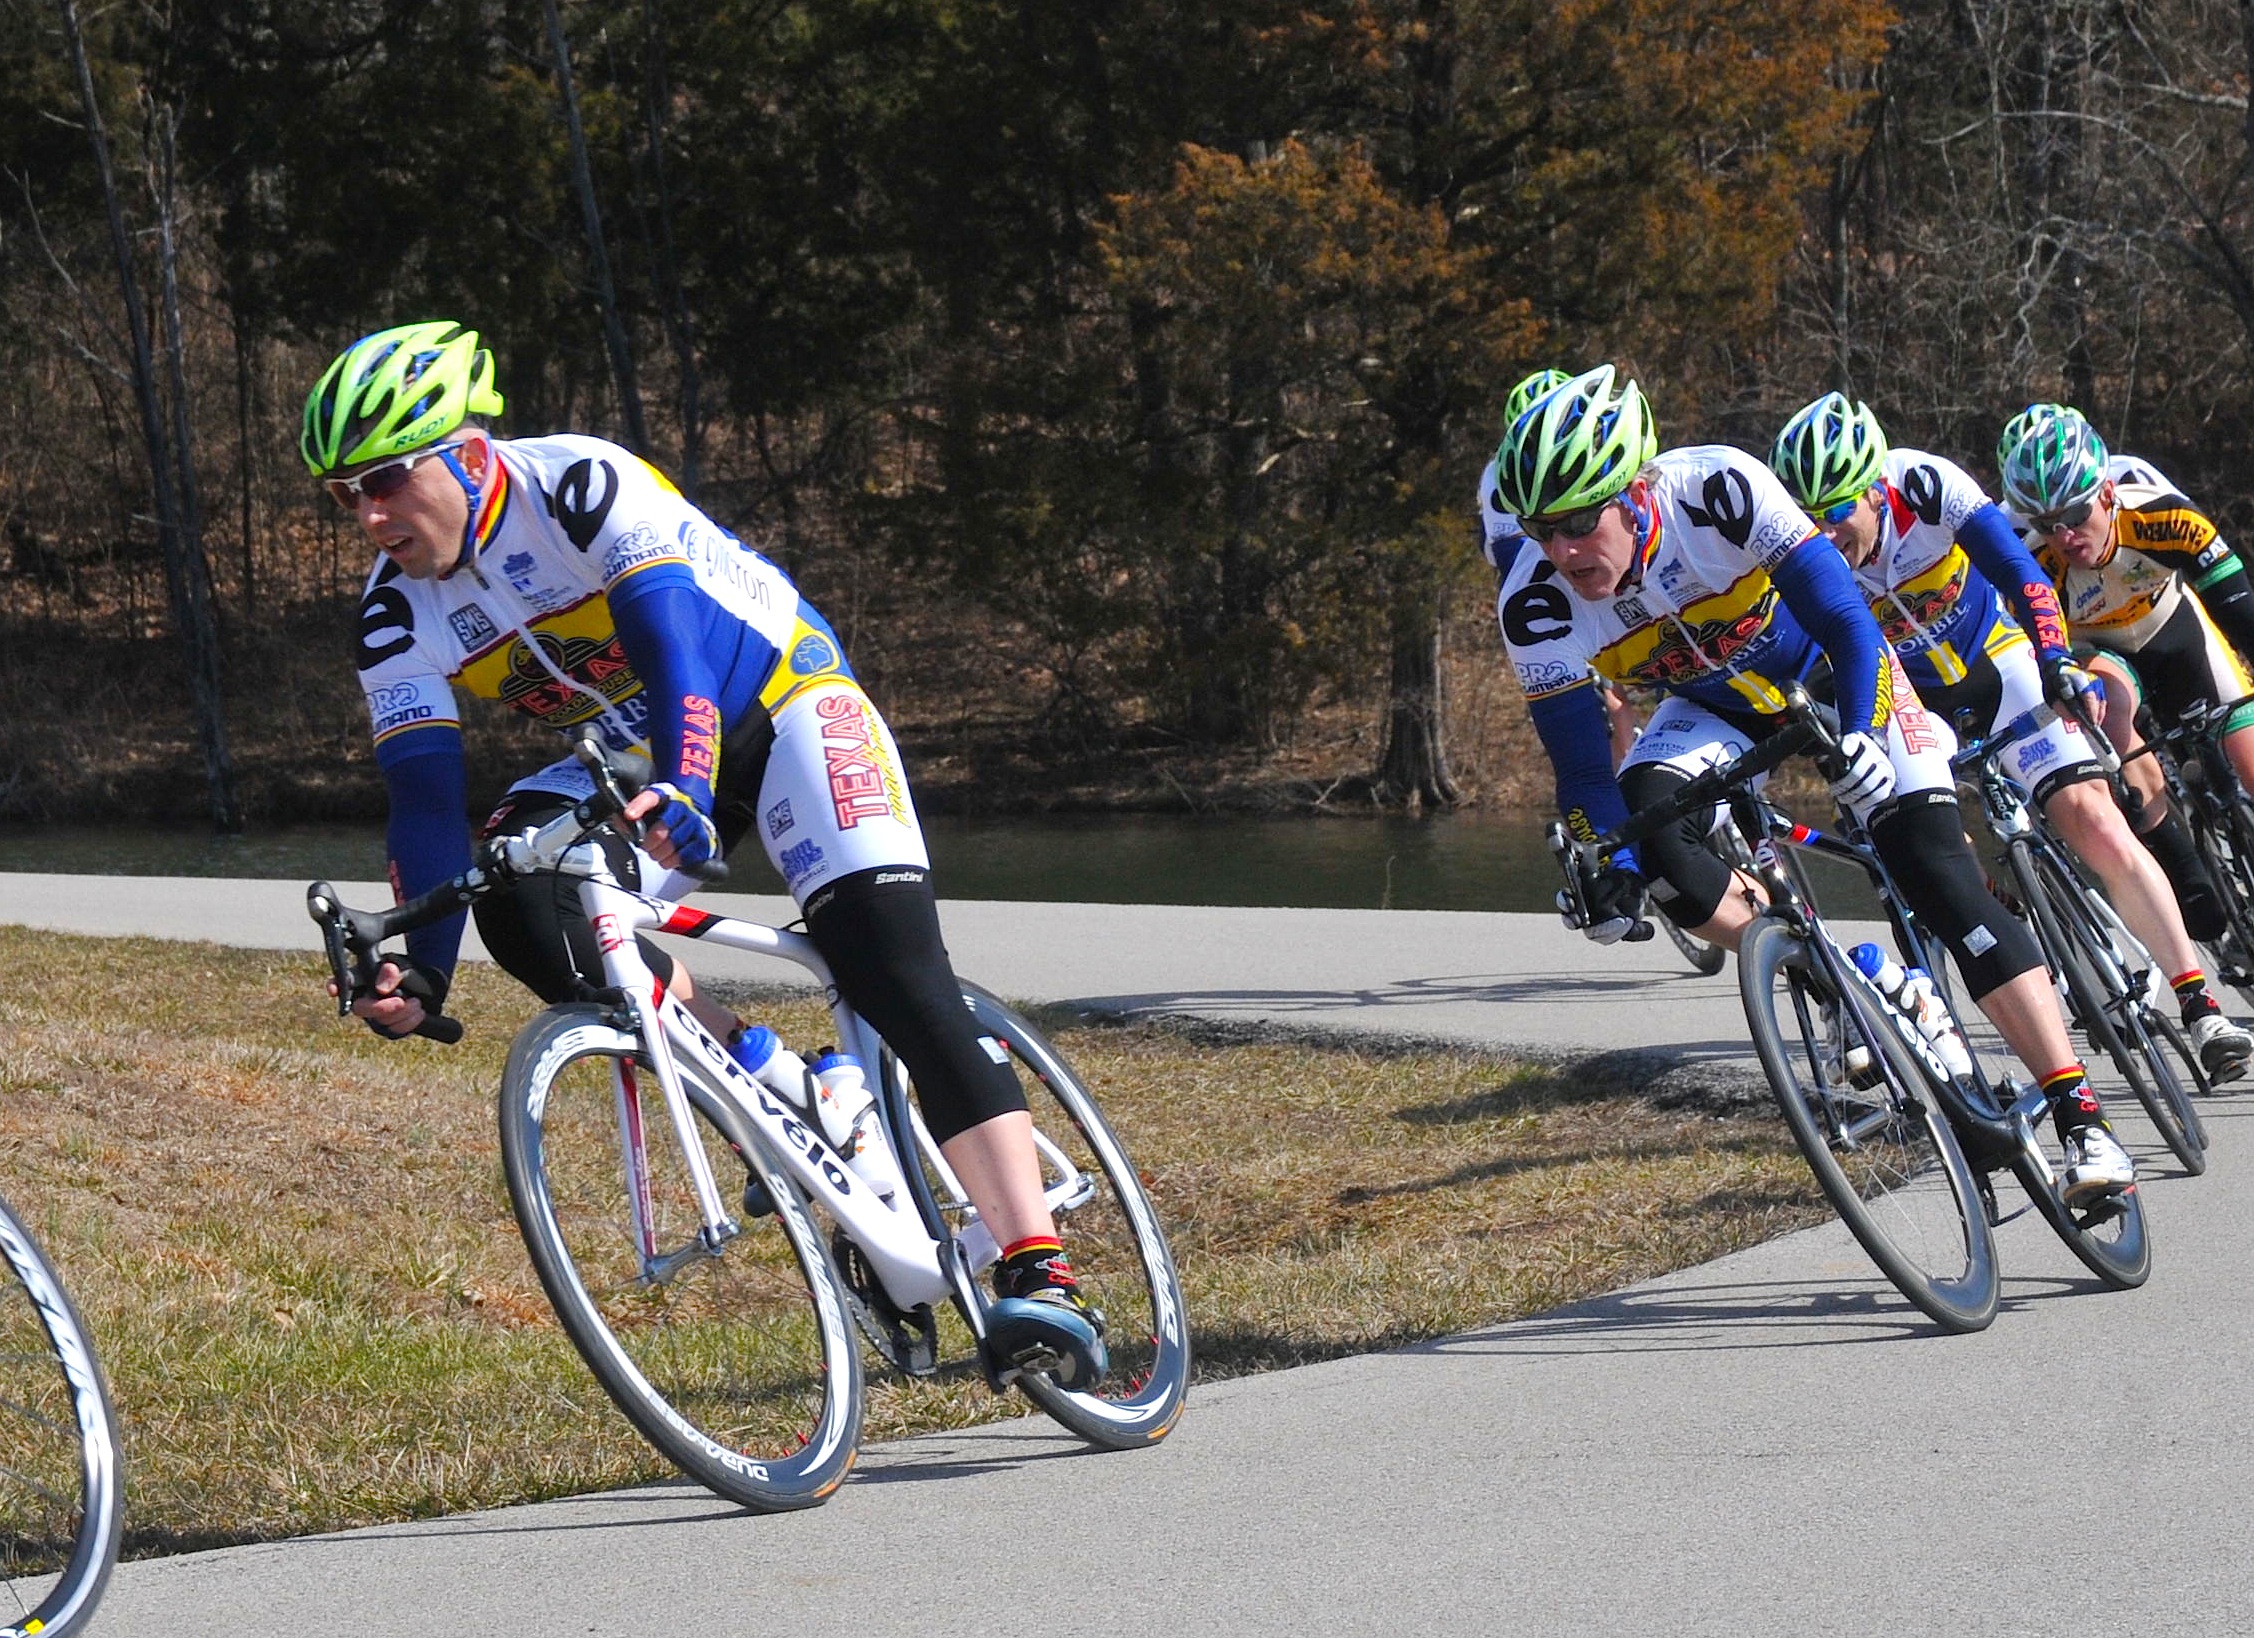 Patrick Odonnell Takes A Win In Nashville Texas Roadhouse in Cycling Nashville